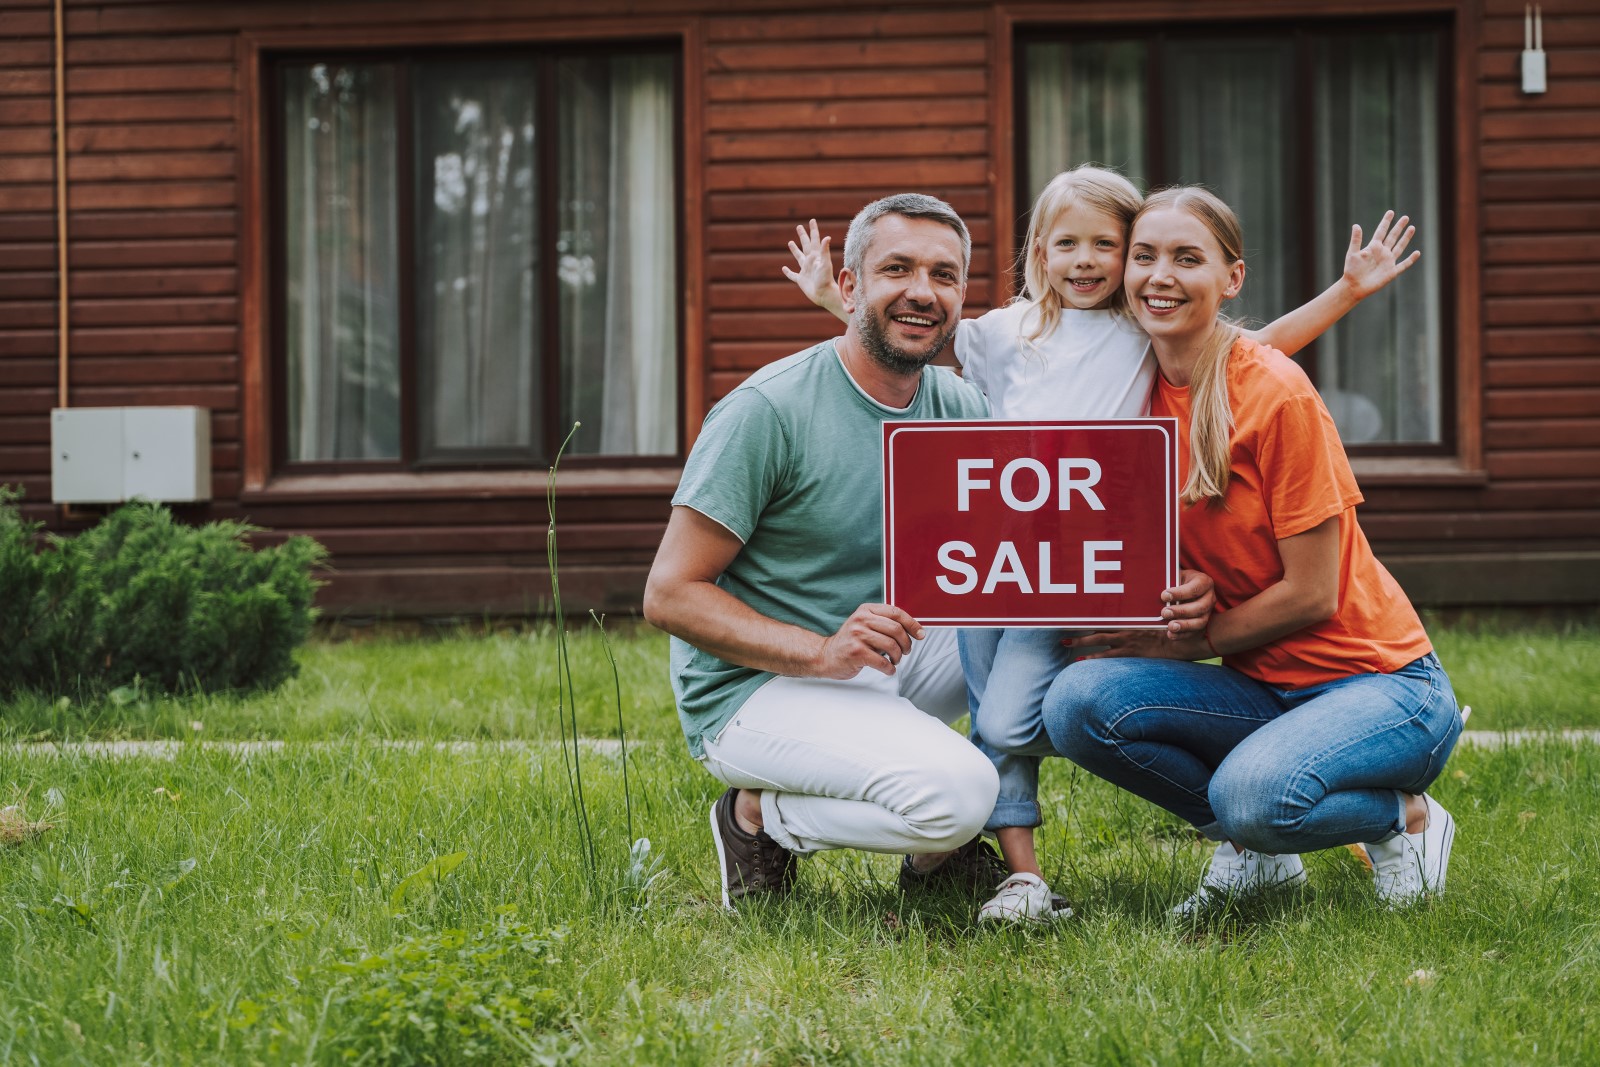 Family of three holding a red for sale sign in front of a brown wood paneled home